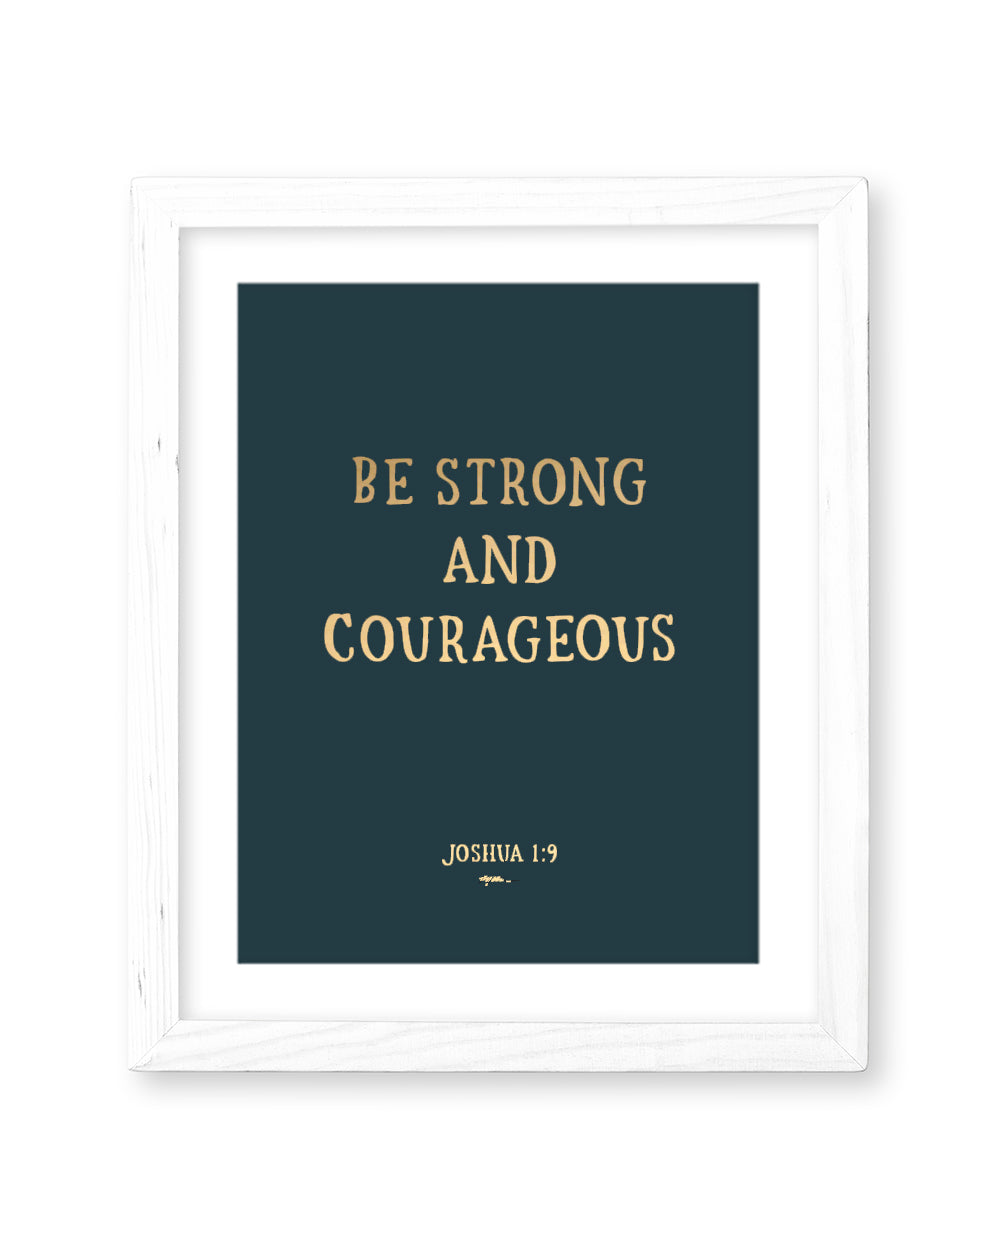 Be Strong and Courageous {Gold Foil} Print